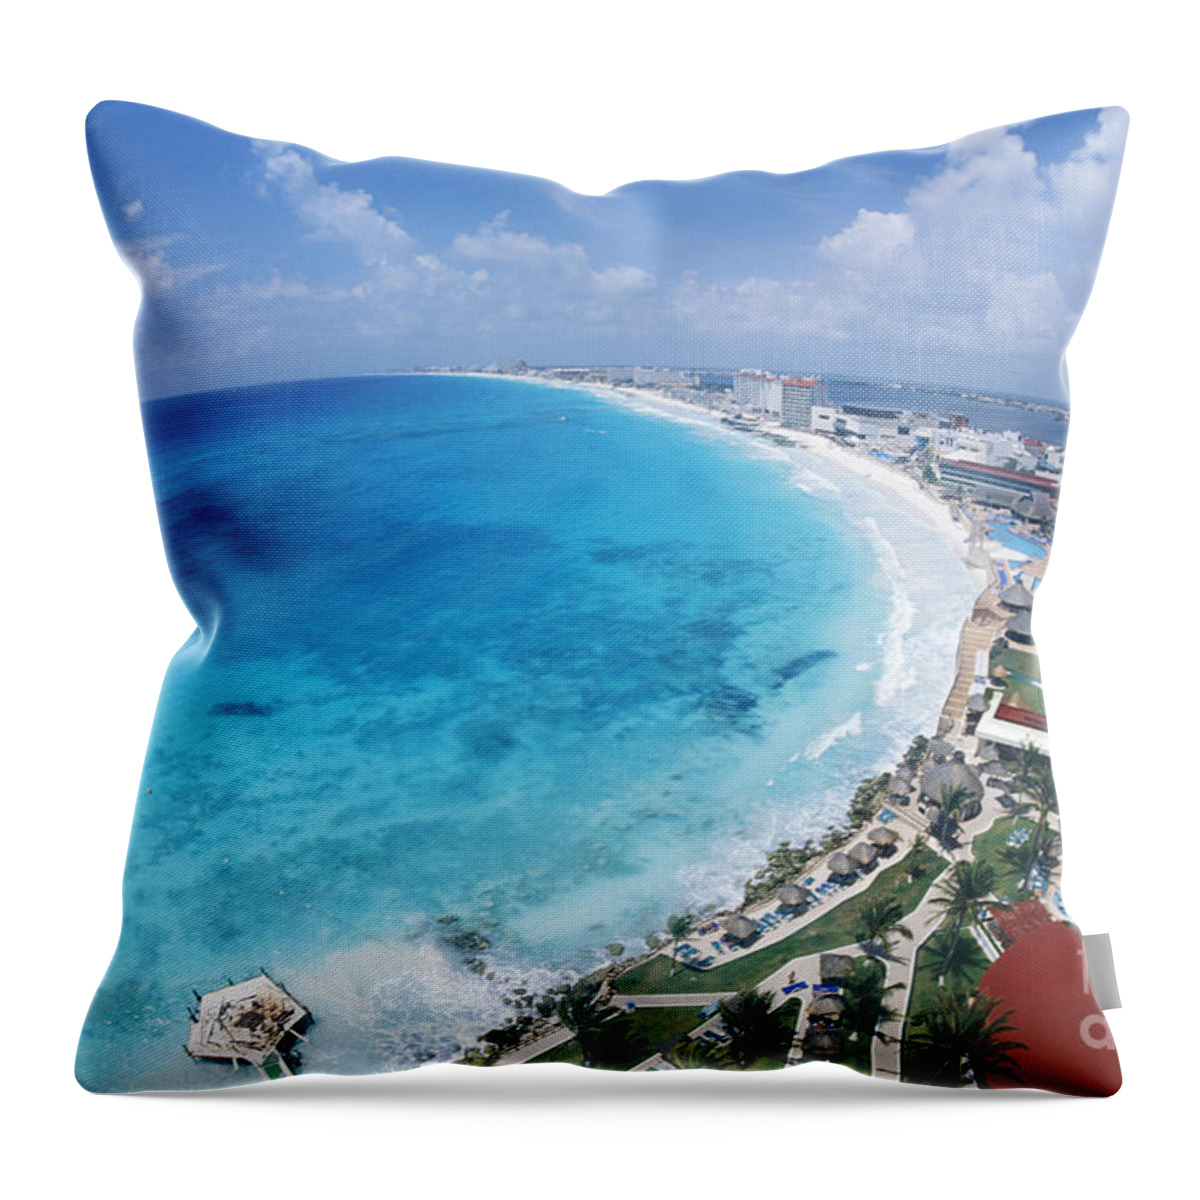 Aerial Throw Pillow featuring the photograph Aerial Of Cancun #1 by Bill Bachmann - Printscapes